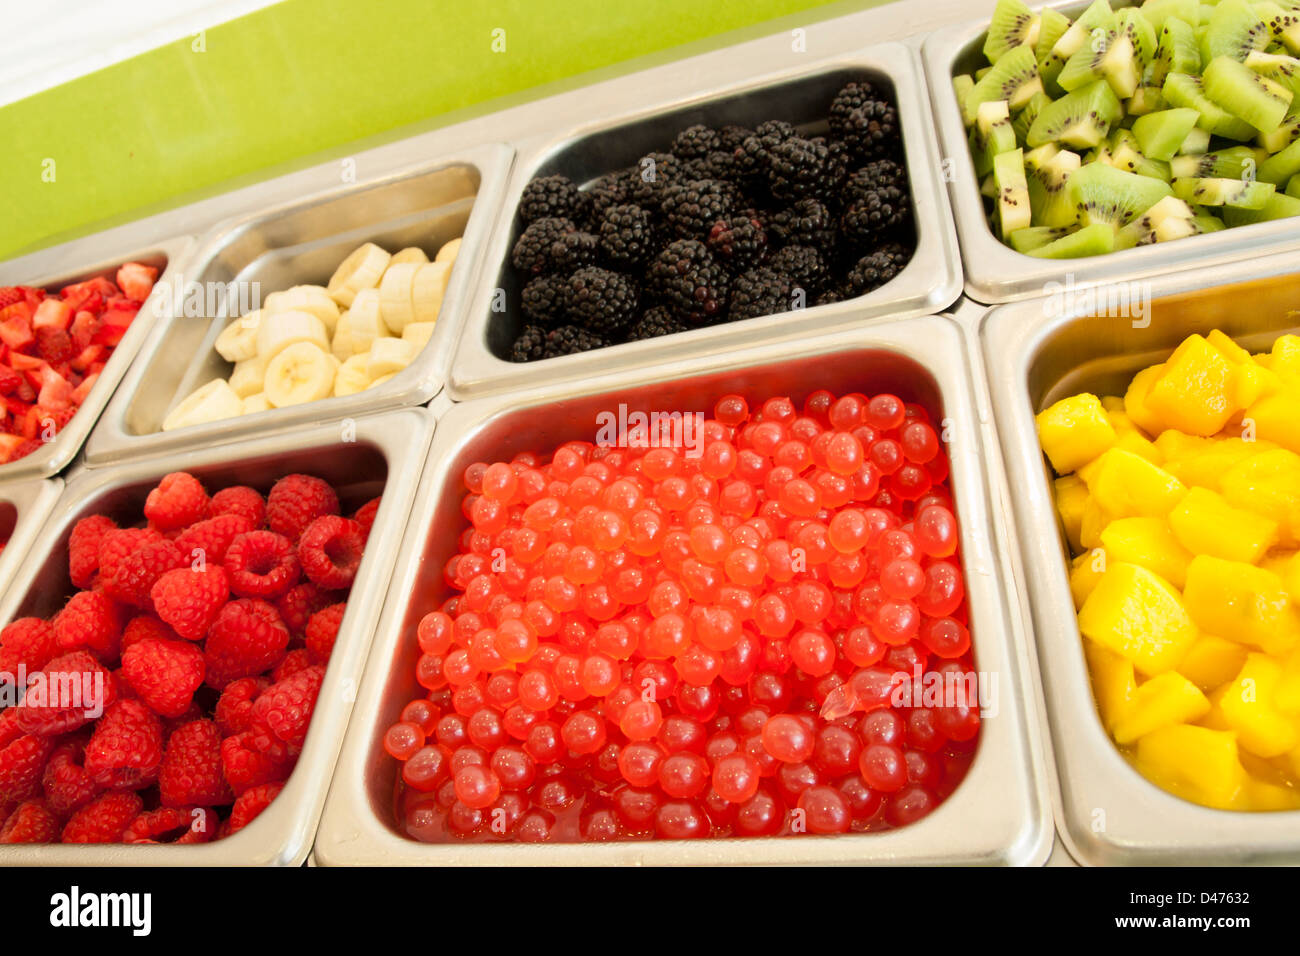 Frozen yogurt toppings bar. Yogurt toppings ranging from fresh fruits,  nuts, fresh-cut candies, syrups and sprinkles Stock Photo - Alamy